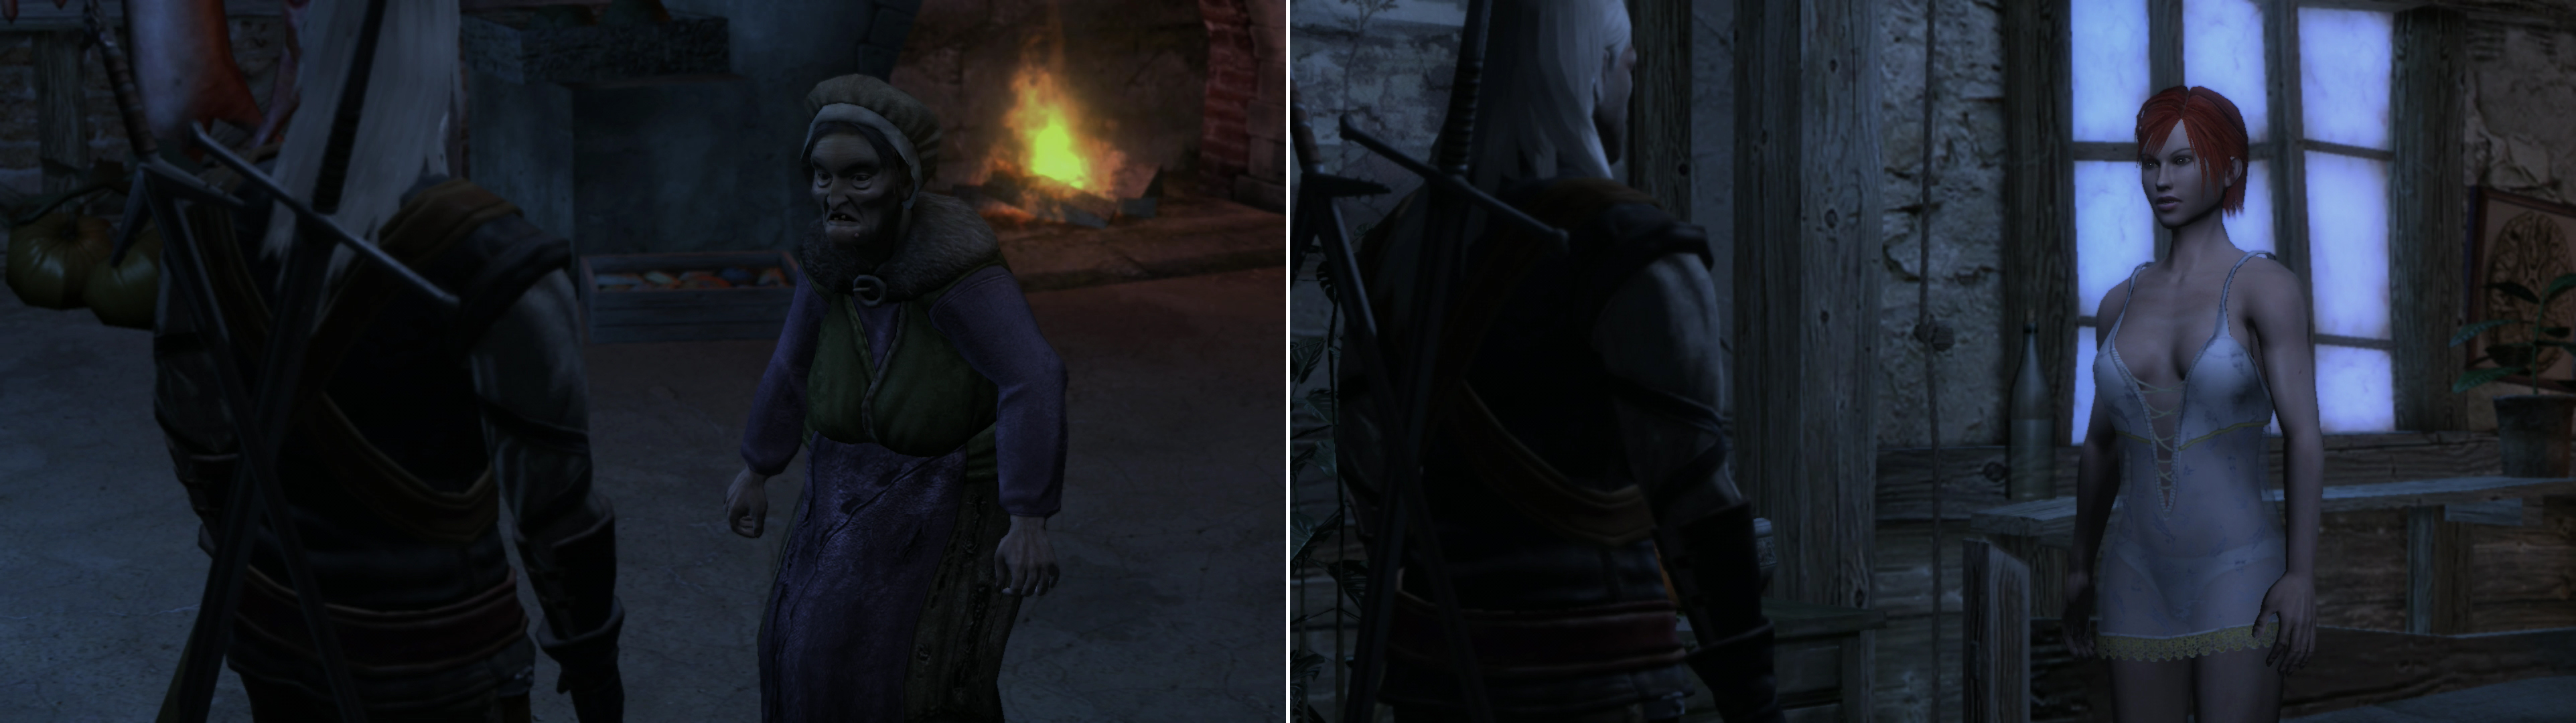 Grandma will pester you every time you enter her house, often frustrating your attempts to visit Shani (left). When you finally make it past the bi-polar, senile old woman downstairs, meet up with Shani and ask her about your Silver Sword (right).